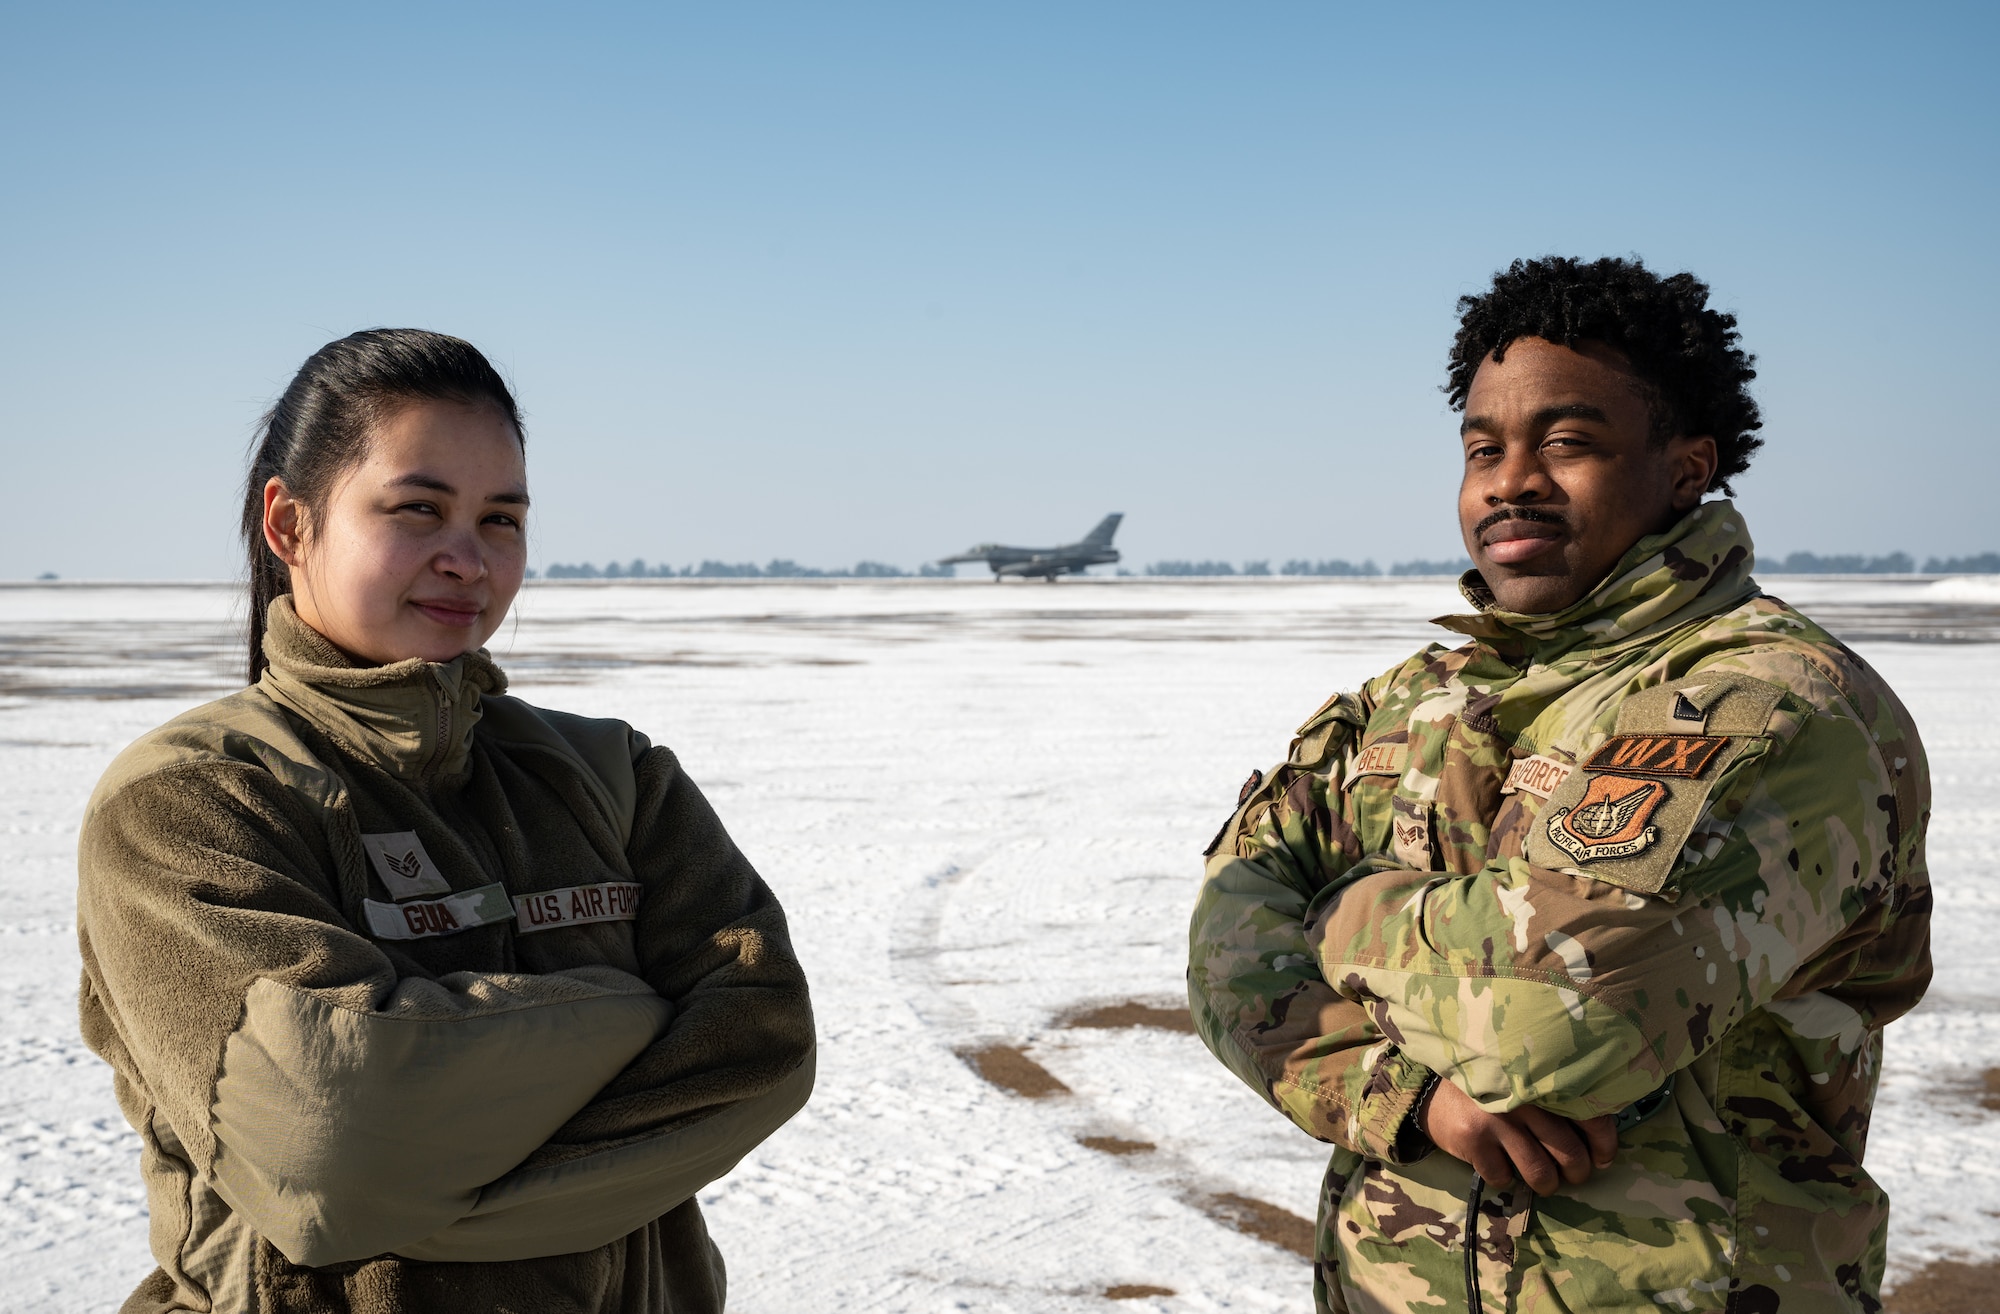 Staff Sgt. Reza Guia (left), and Senior Airman Patrick Bell, both 8th Operations Support Squadron weather forecasters, stand for a photo at Kunsan Air Base, Republic of Korea, Dec. 2022. Kunsan’s weather flight informs leaders on weather conditions that could pose a safety threat to personnel and assets, arming them with knowledge to make calls on weather safety precautions. (U.S. Air Force photo by Staff Sgt. Sadie Colbert)